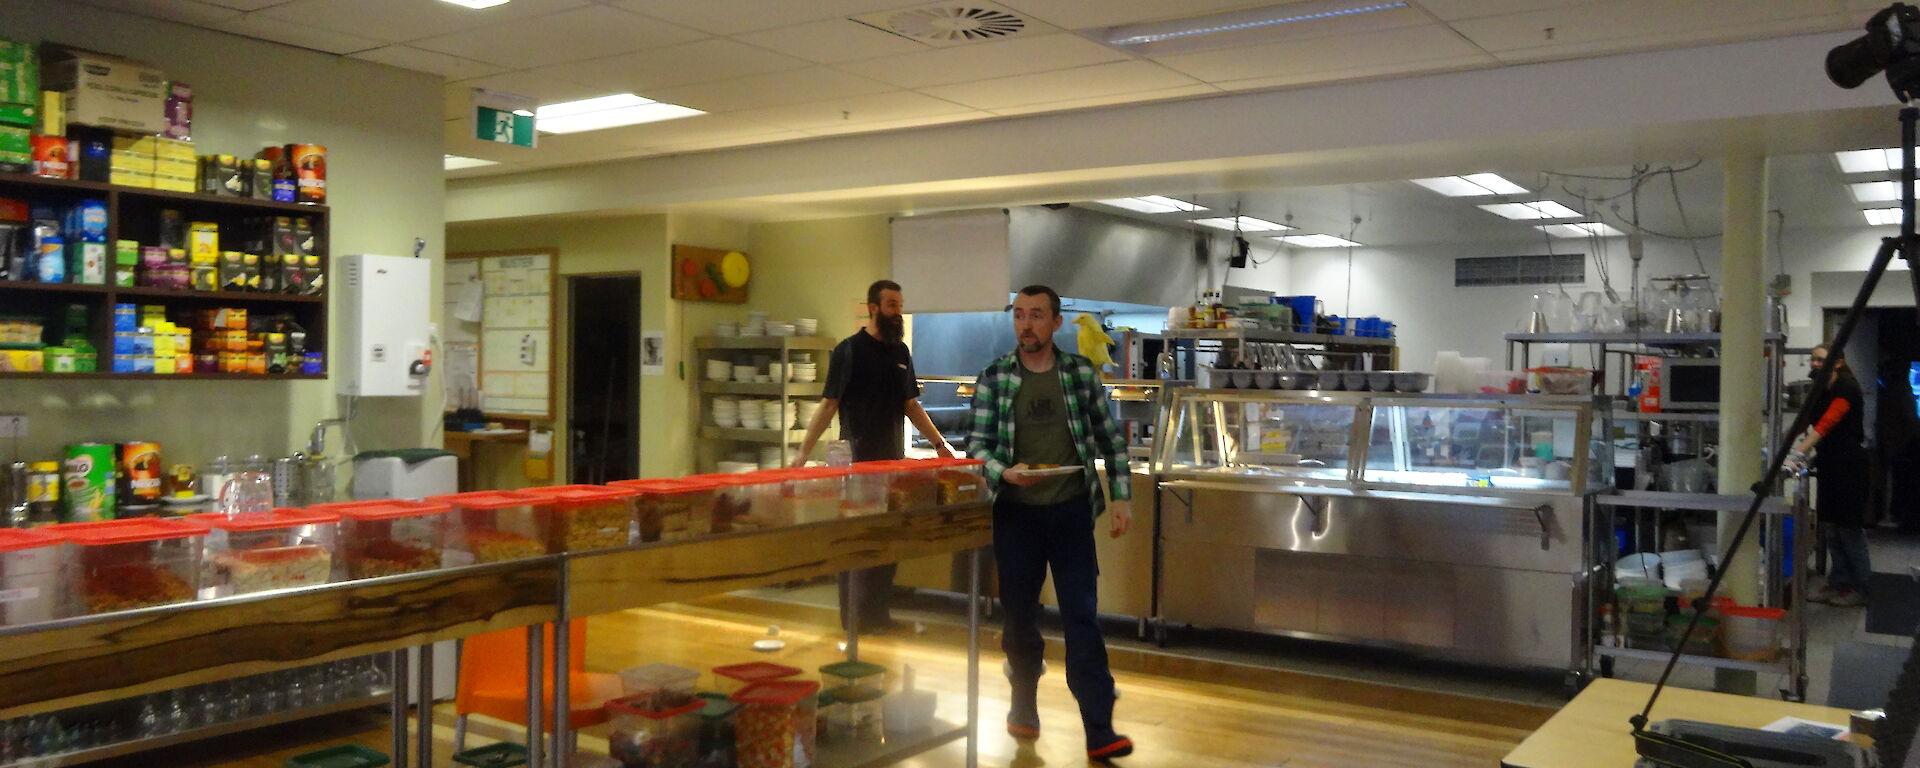 Two expeditioners walking towards a video camera in the kitchen